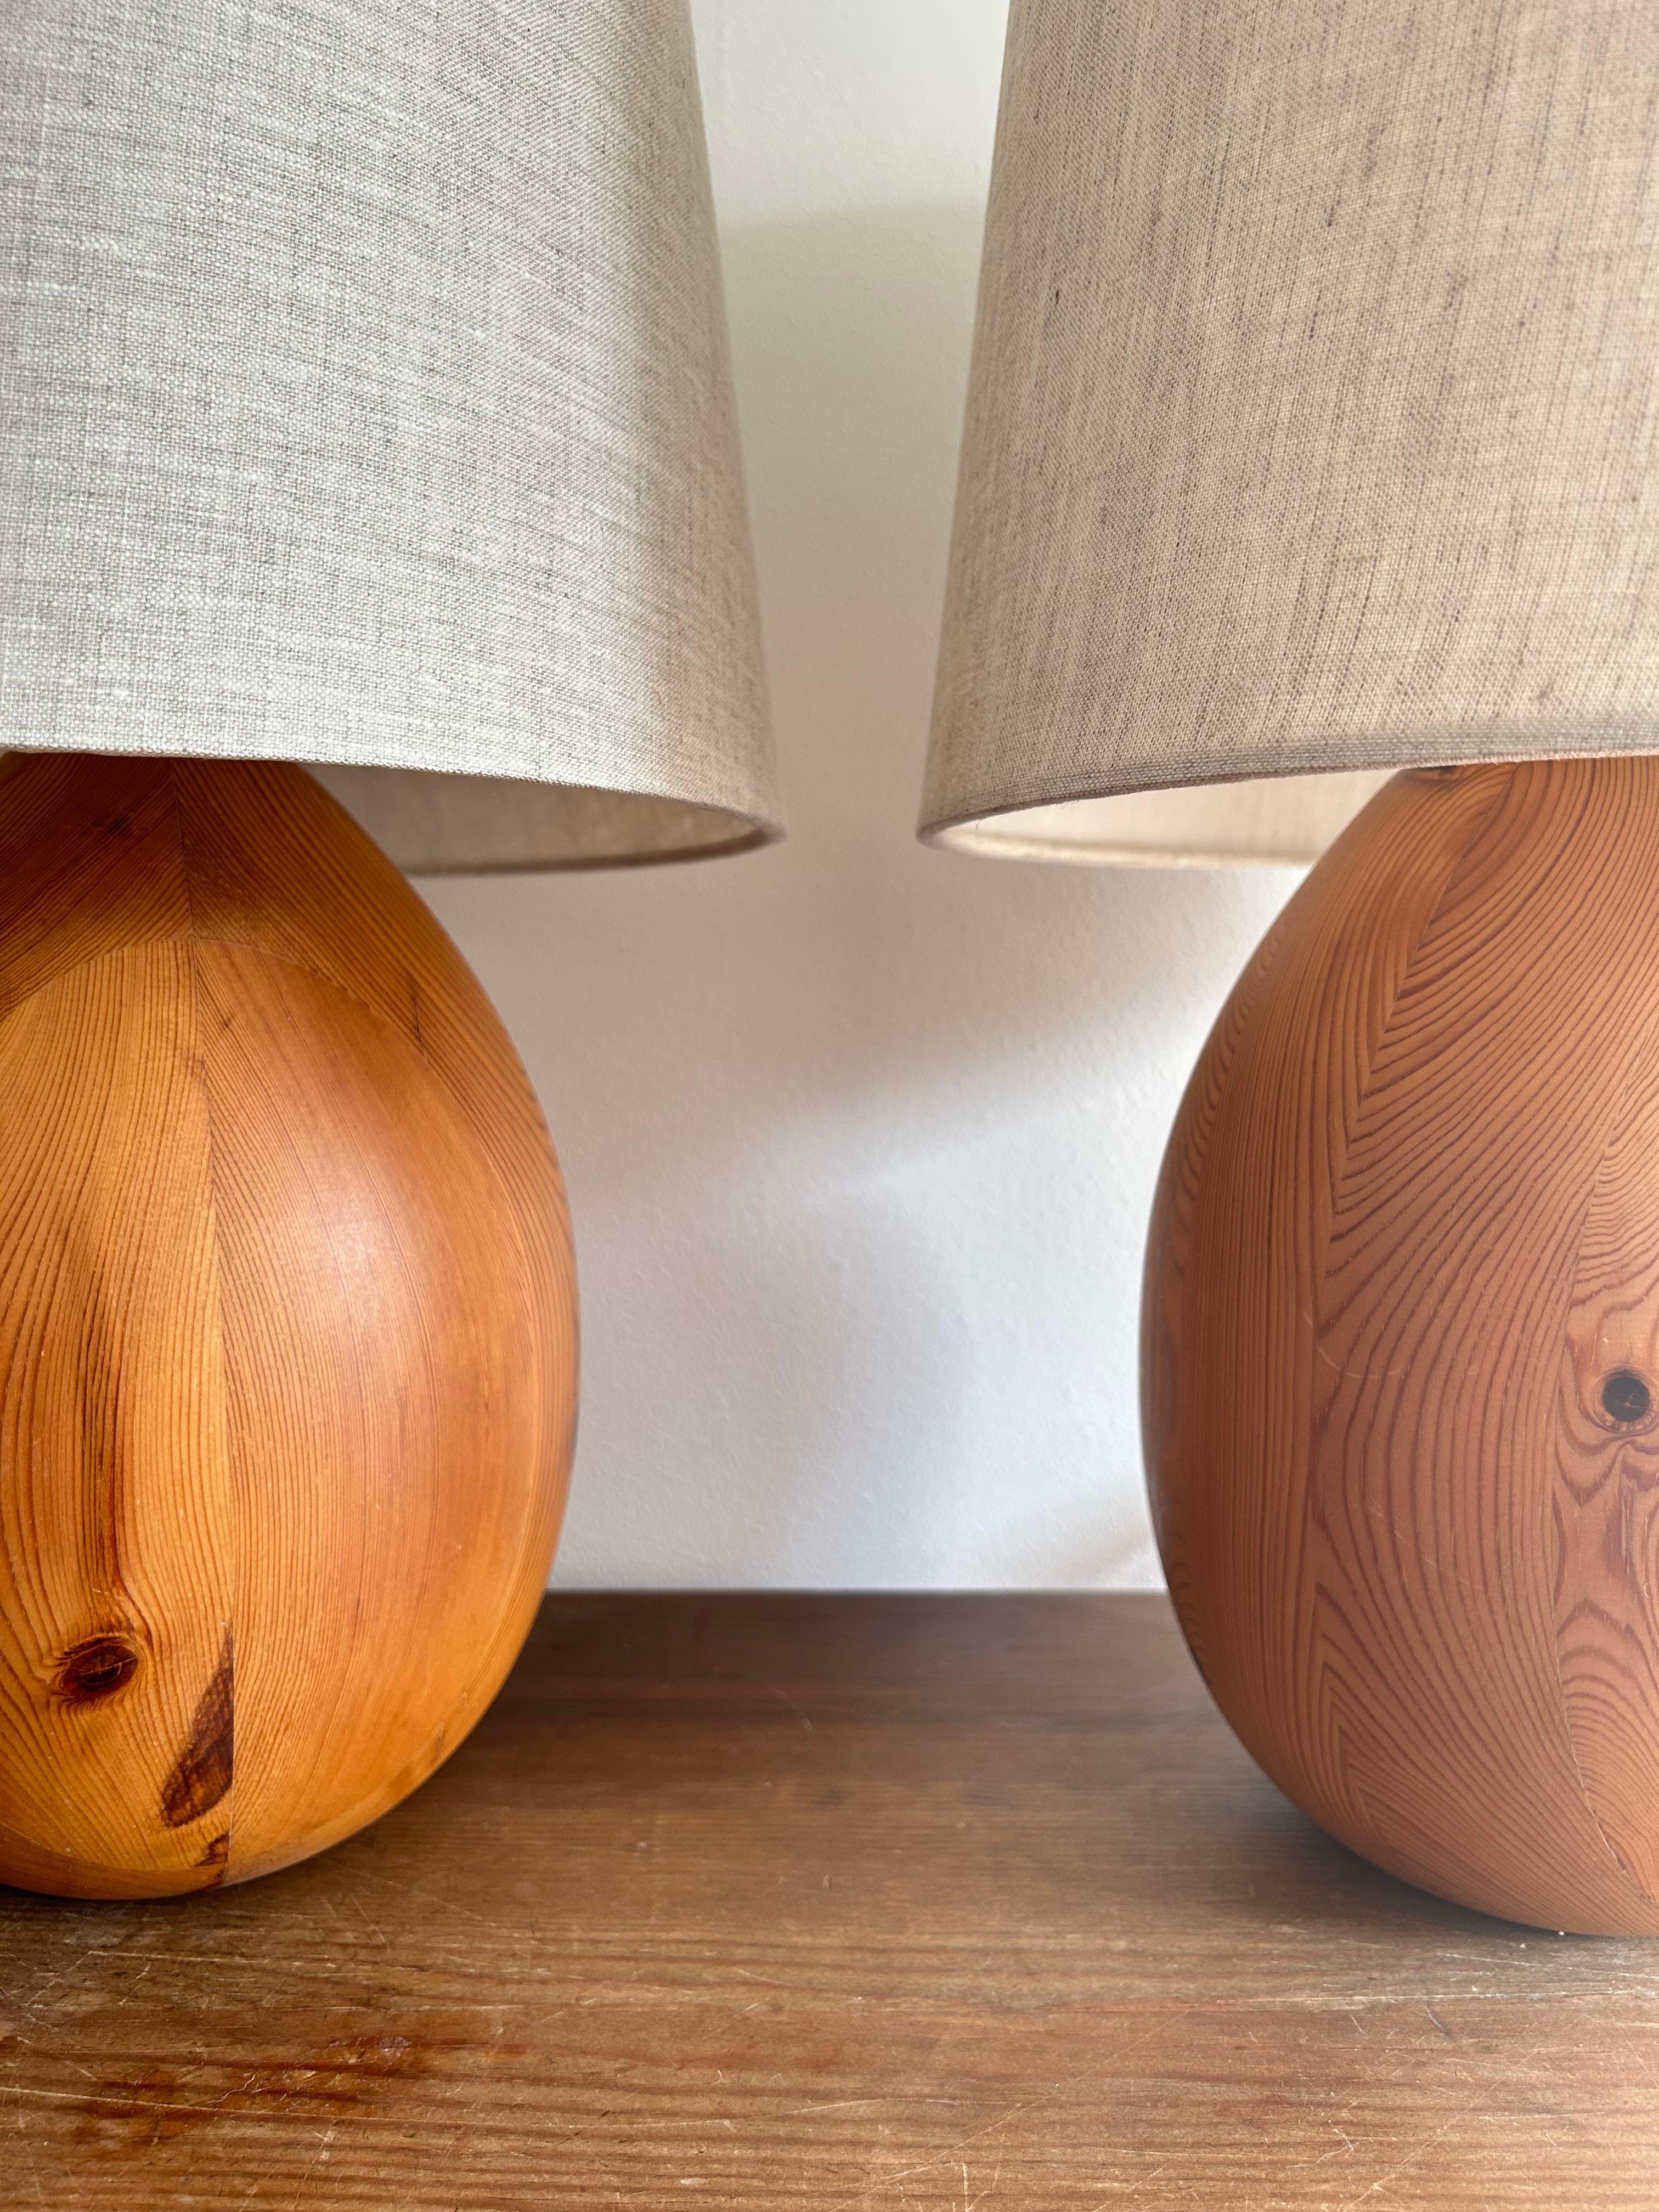 Rare pair of pine table lamps made in Sweden in the 1960s.

The lamps are made in pine which has been oil treated and therefore makes the beautiful grain standout even more.
The lamps have the original bulb sockets and original wiring and switch